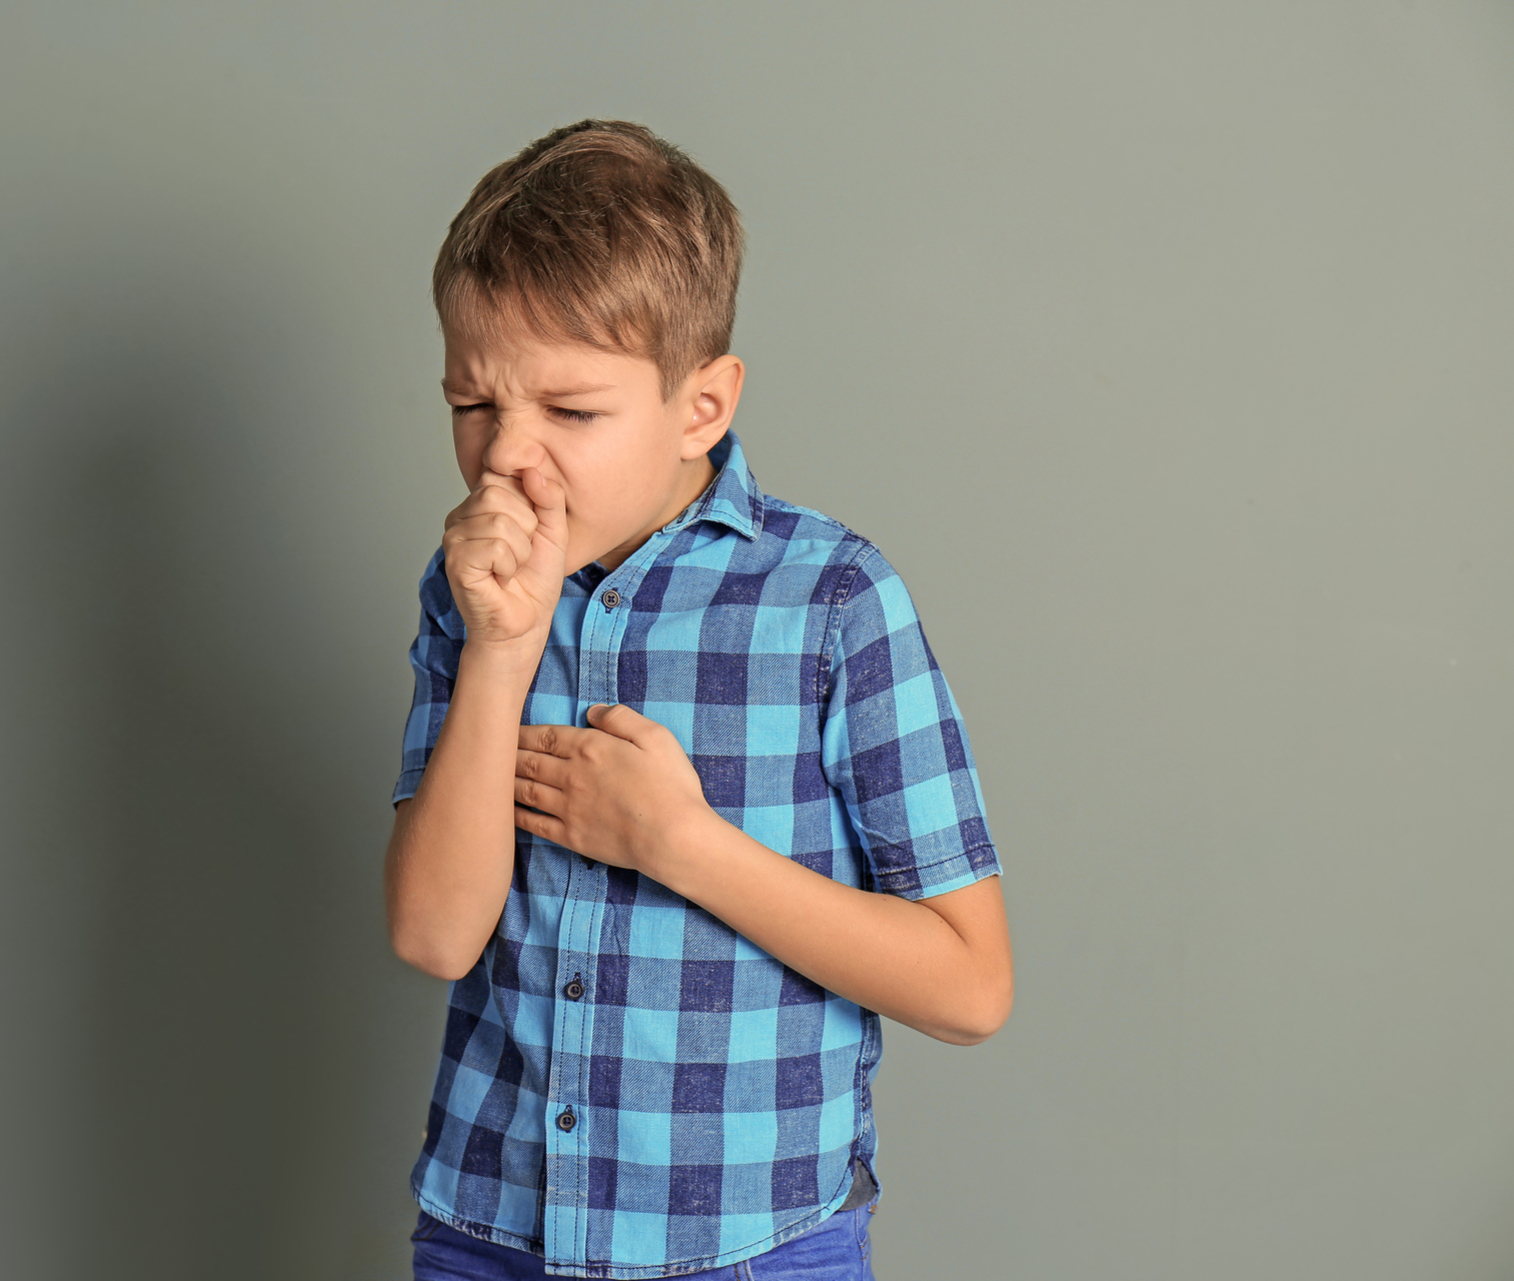 Male child in blue shirt coughing